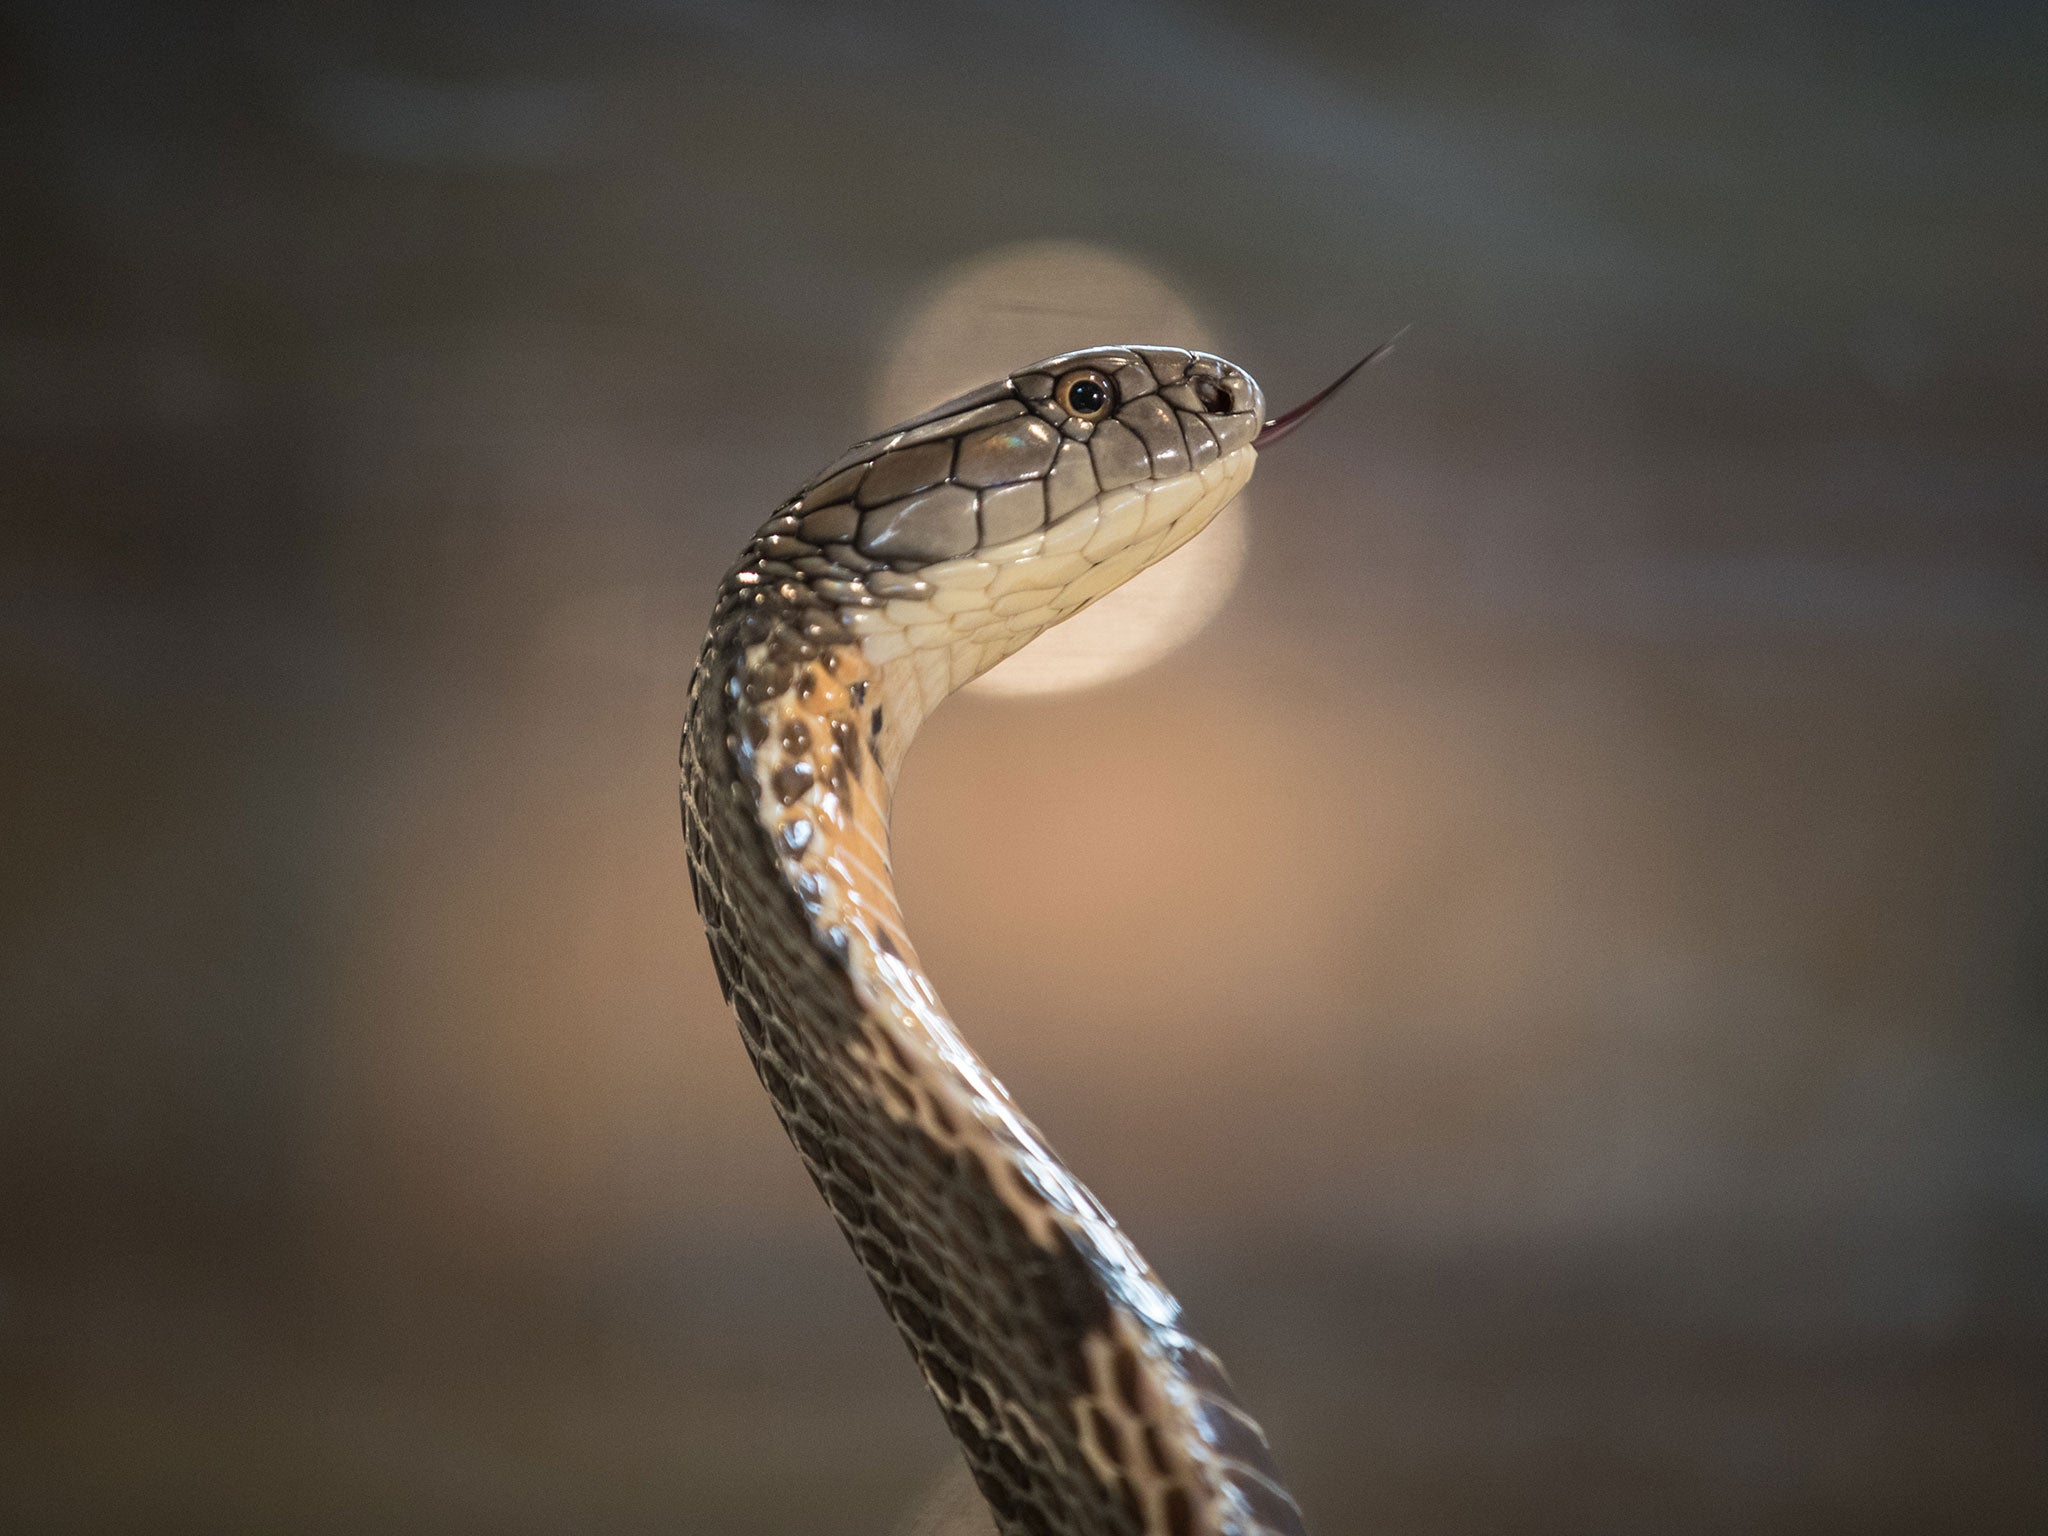  A quirk of evolution means a particular gene stays 'switched on' for longer than usual during snakes' embryonic development  Snakes ow